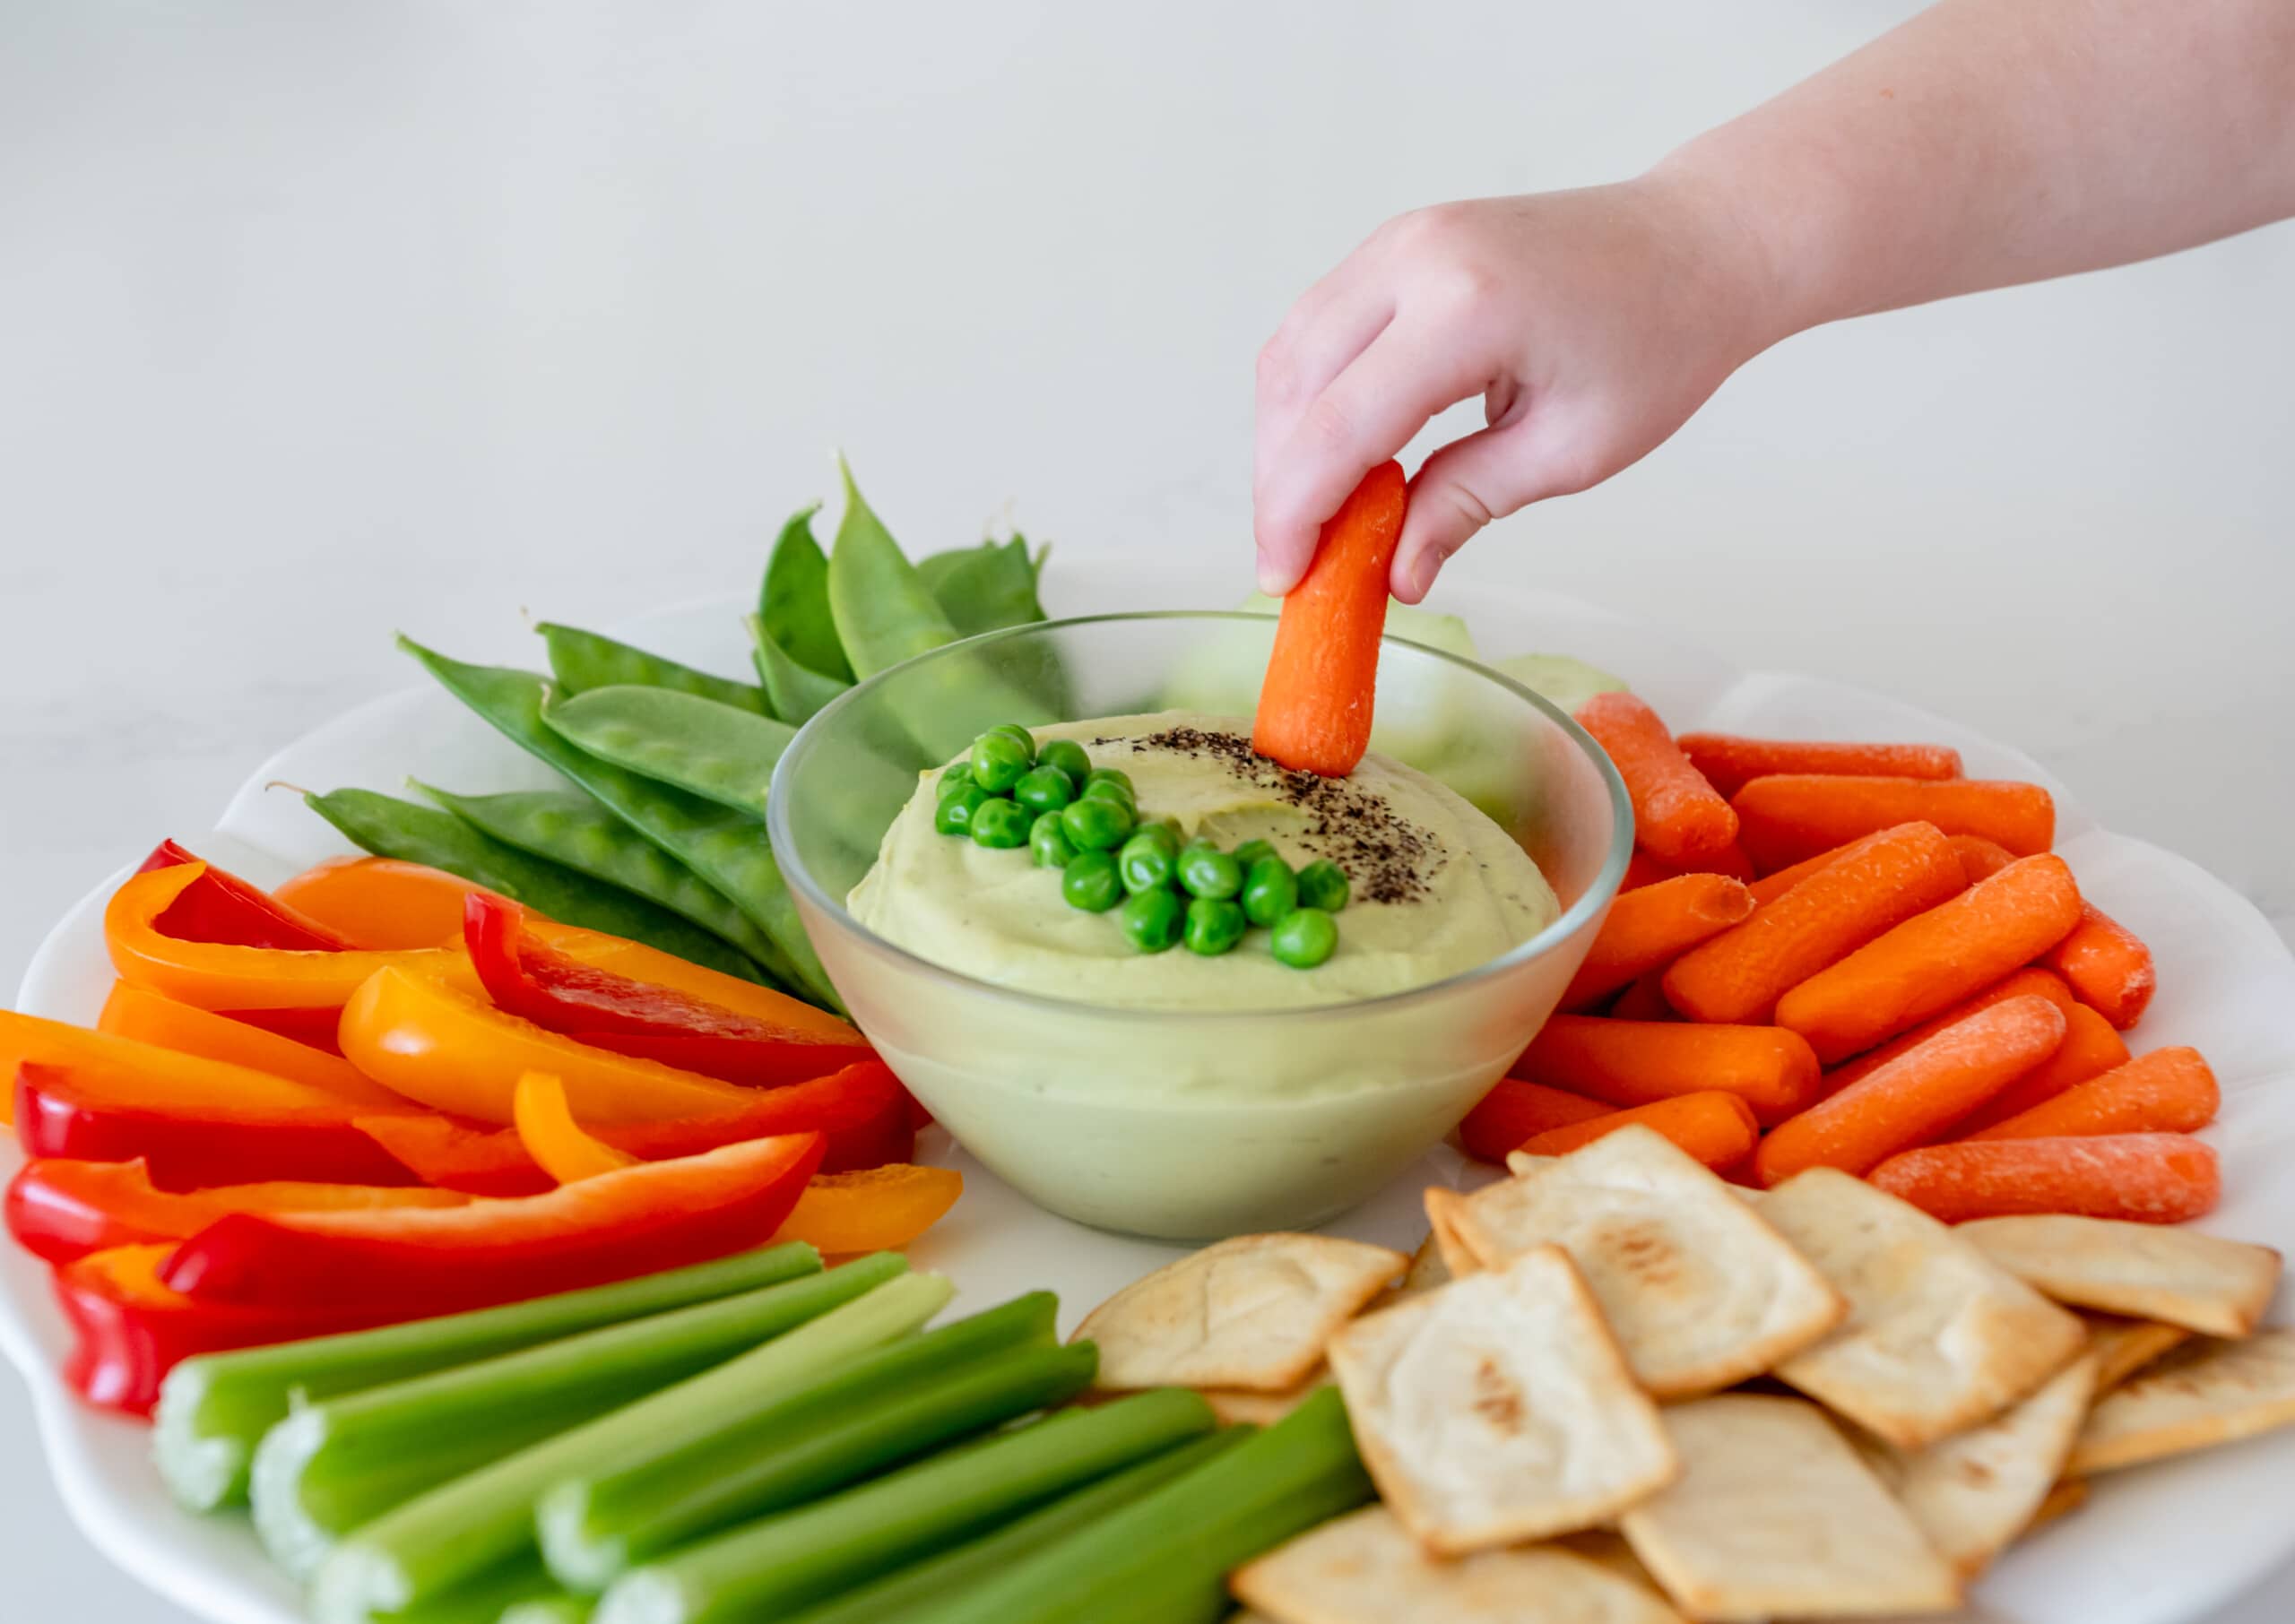 Little hand dipping a carrot into a bowl of green pea hummus.